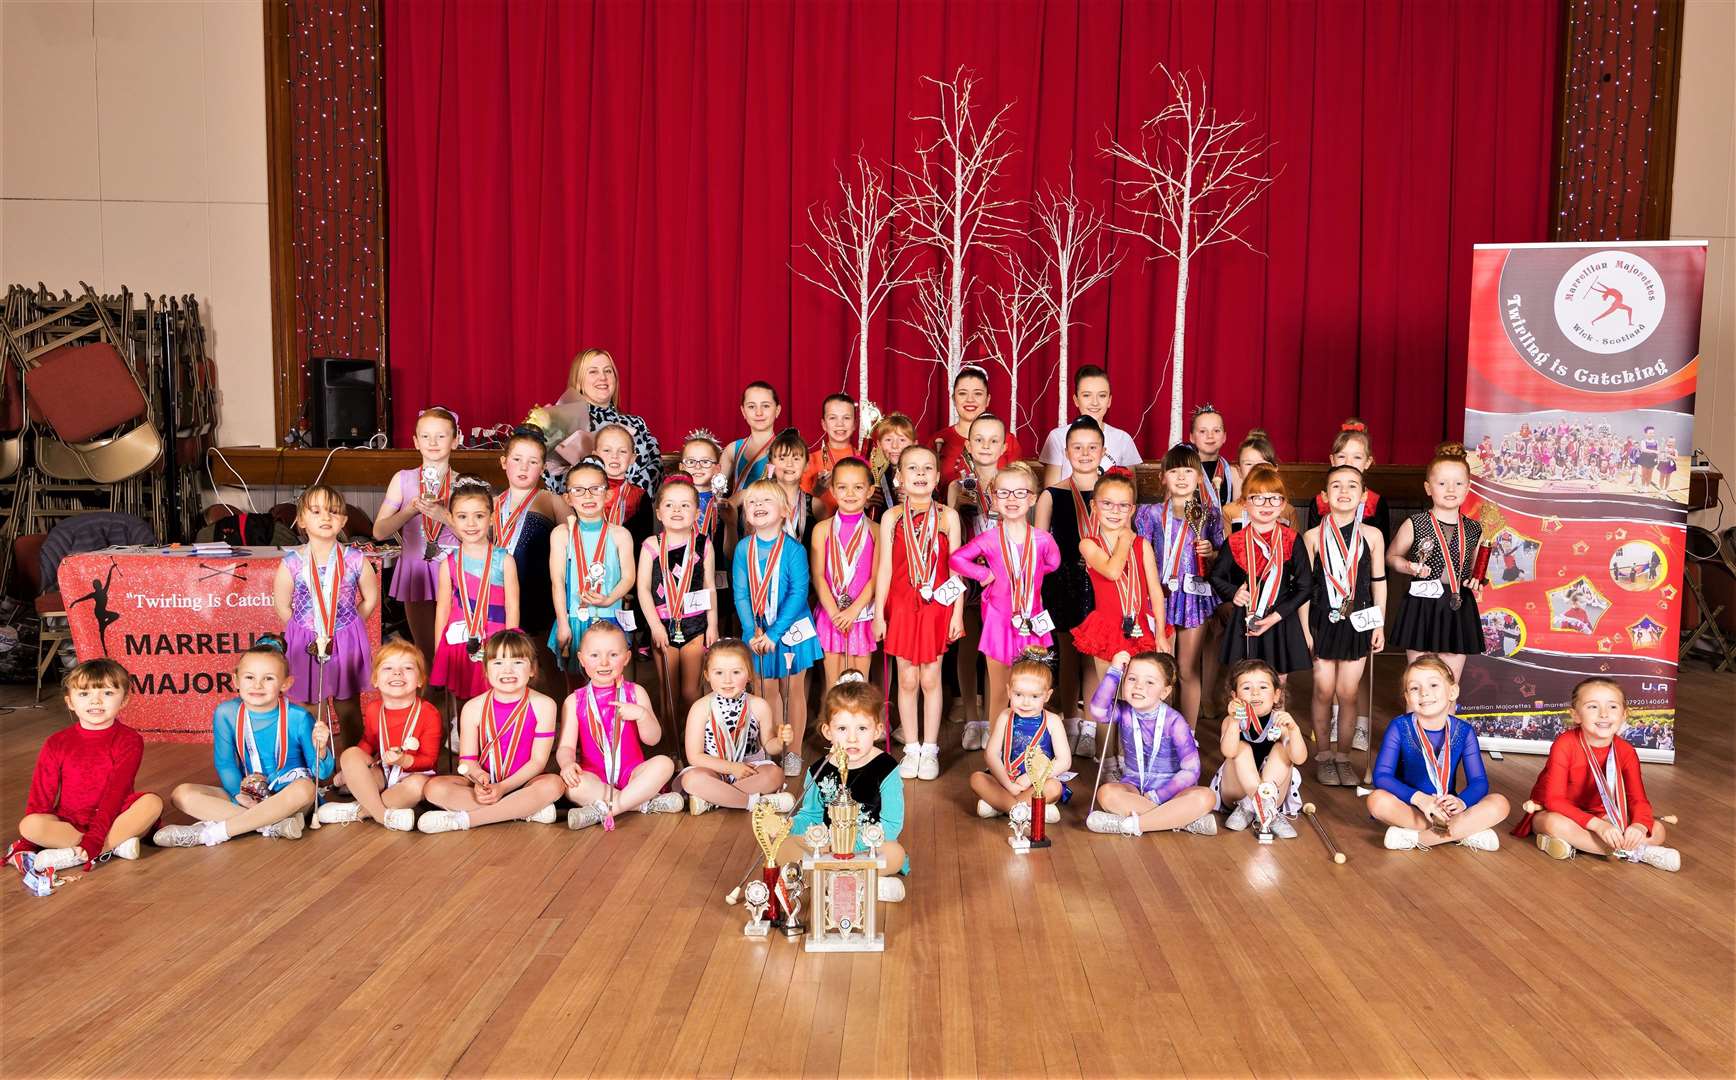 Marrellian Majorettes pictured at the Assembly Rooms for the Annual Christmas Interschool Competition 2022.